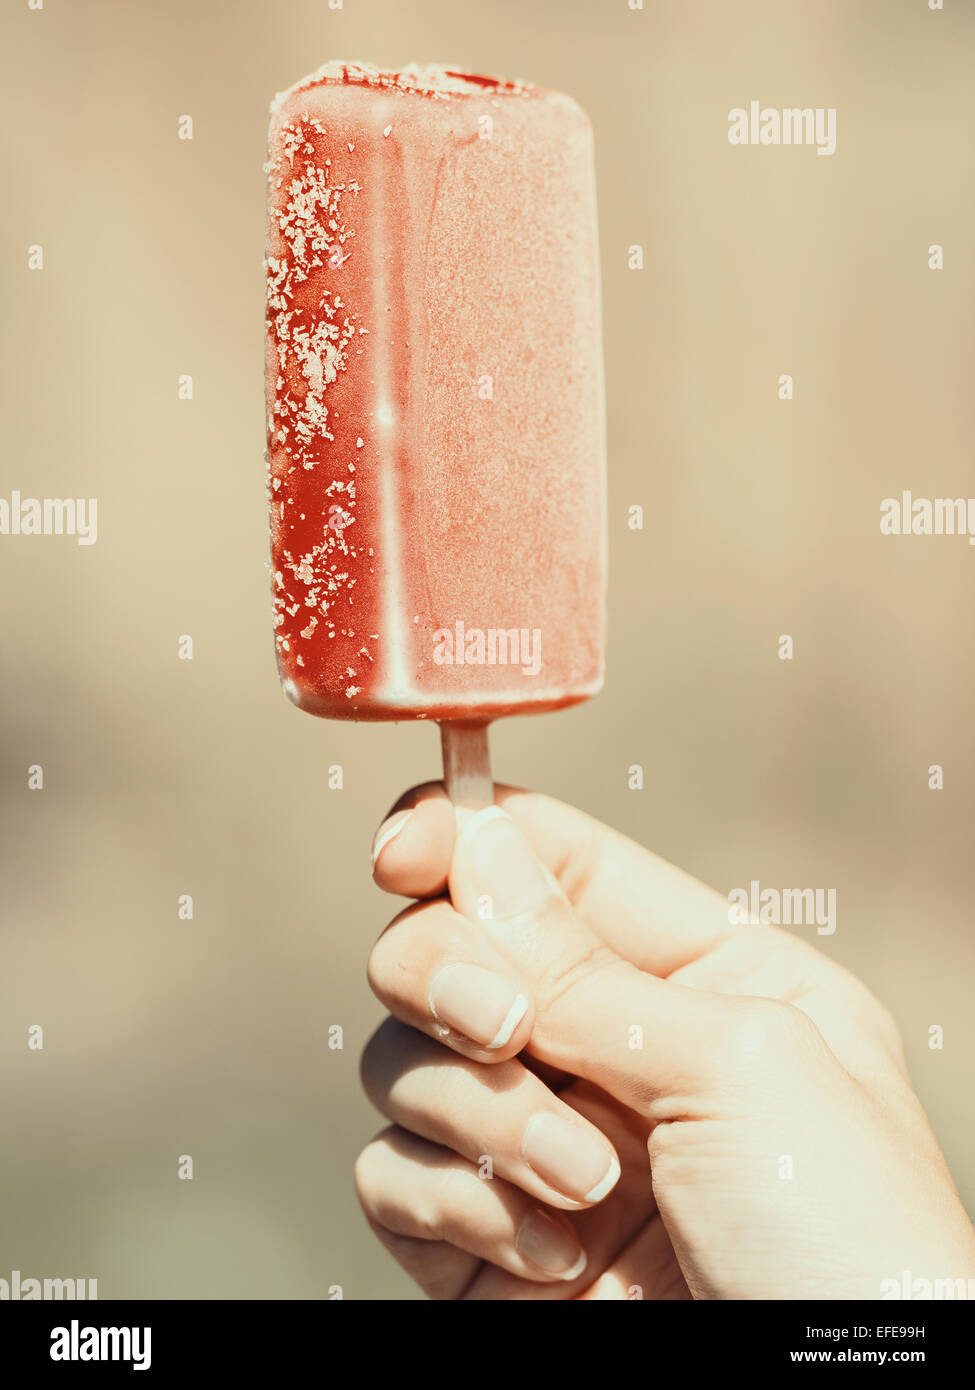 Tasty Homemade Ice Creams Pop With Sticks In Containers On Grey Stock  Photo, Picture and Royalty Free Image. Image 106122906.